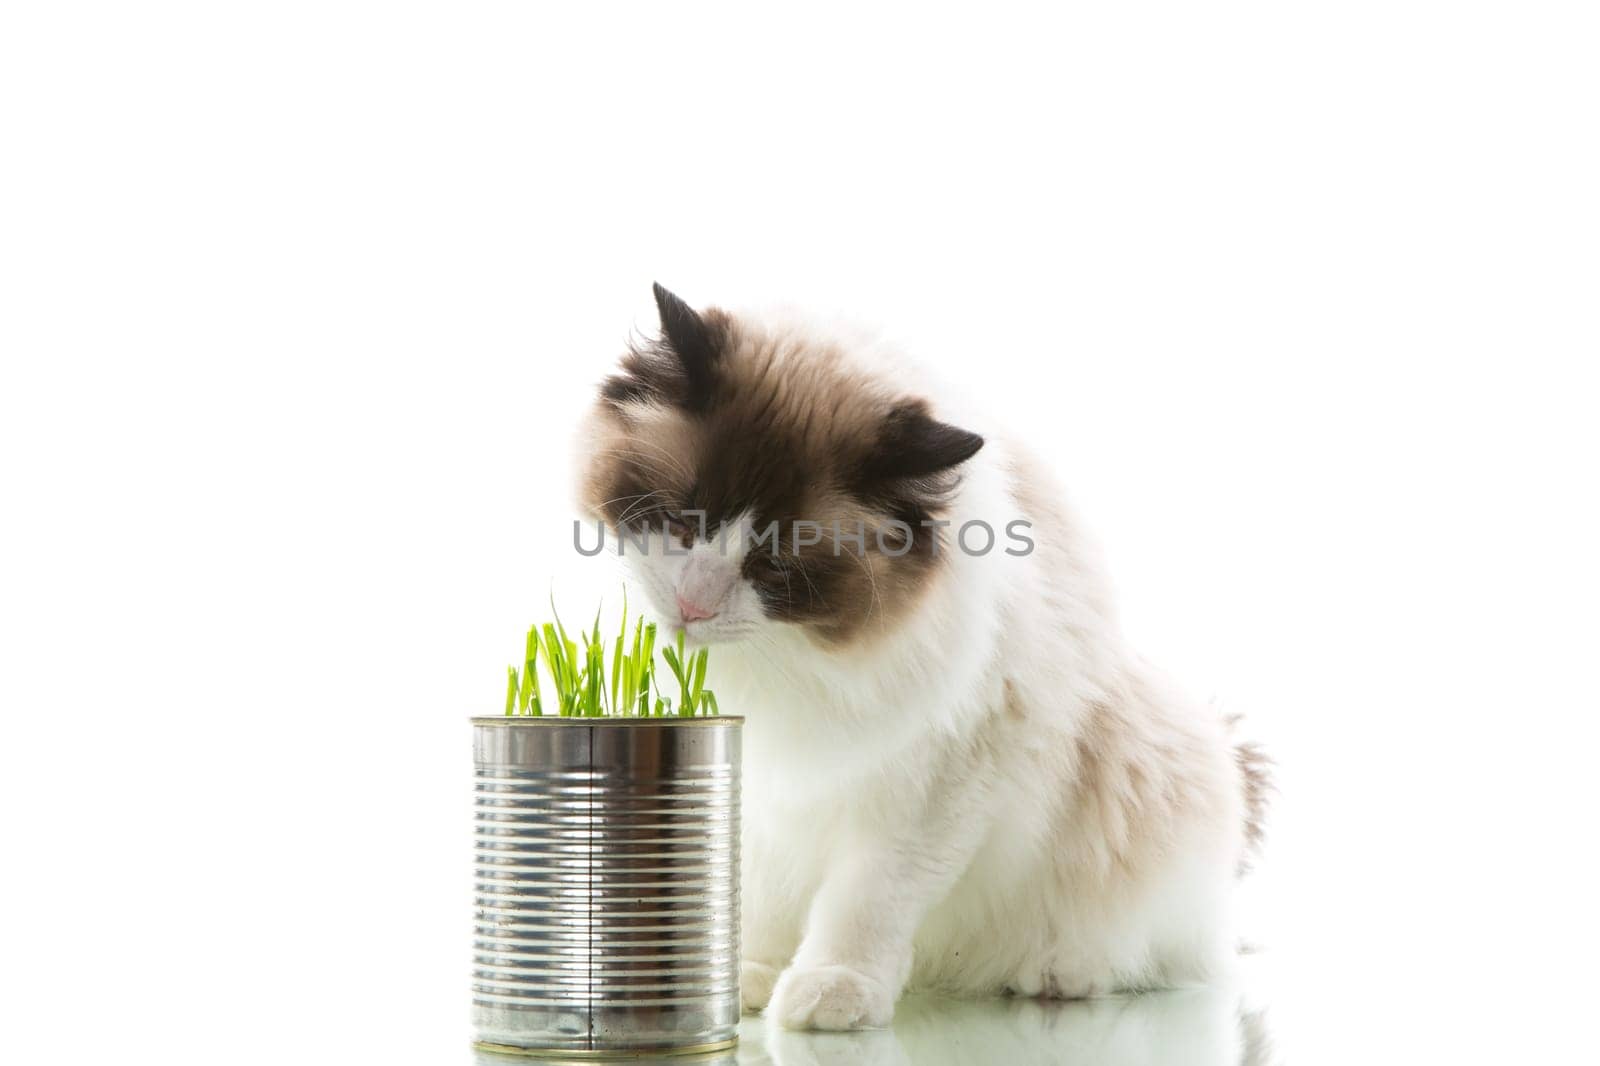 cat breed Ragdoll eats grass from a tin, isolated on a white background